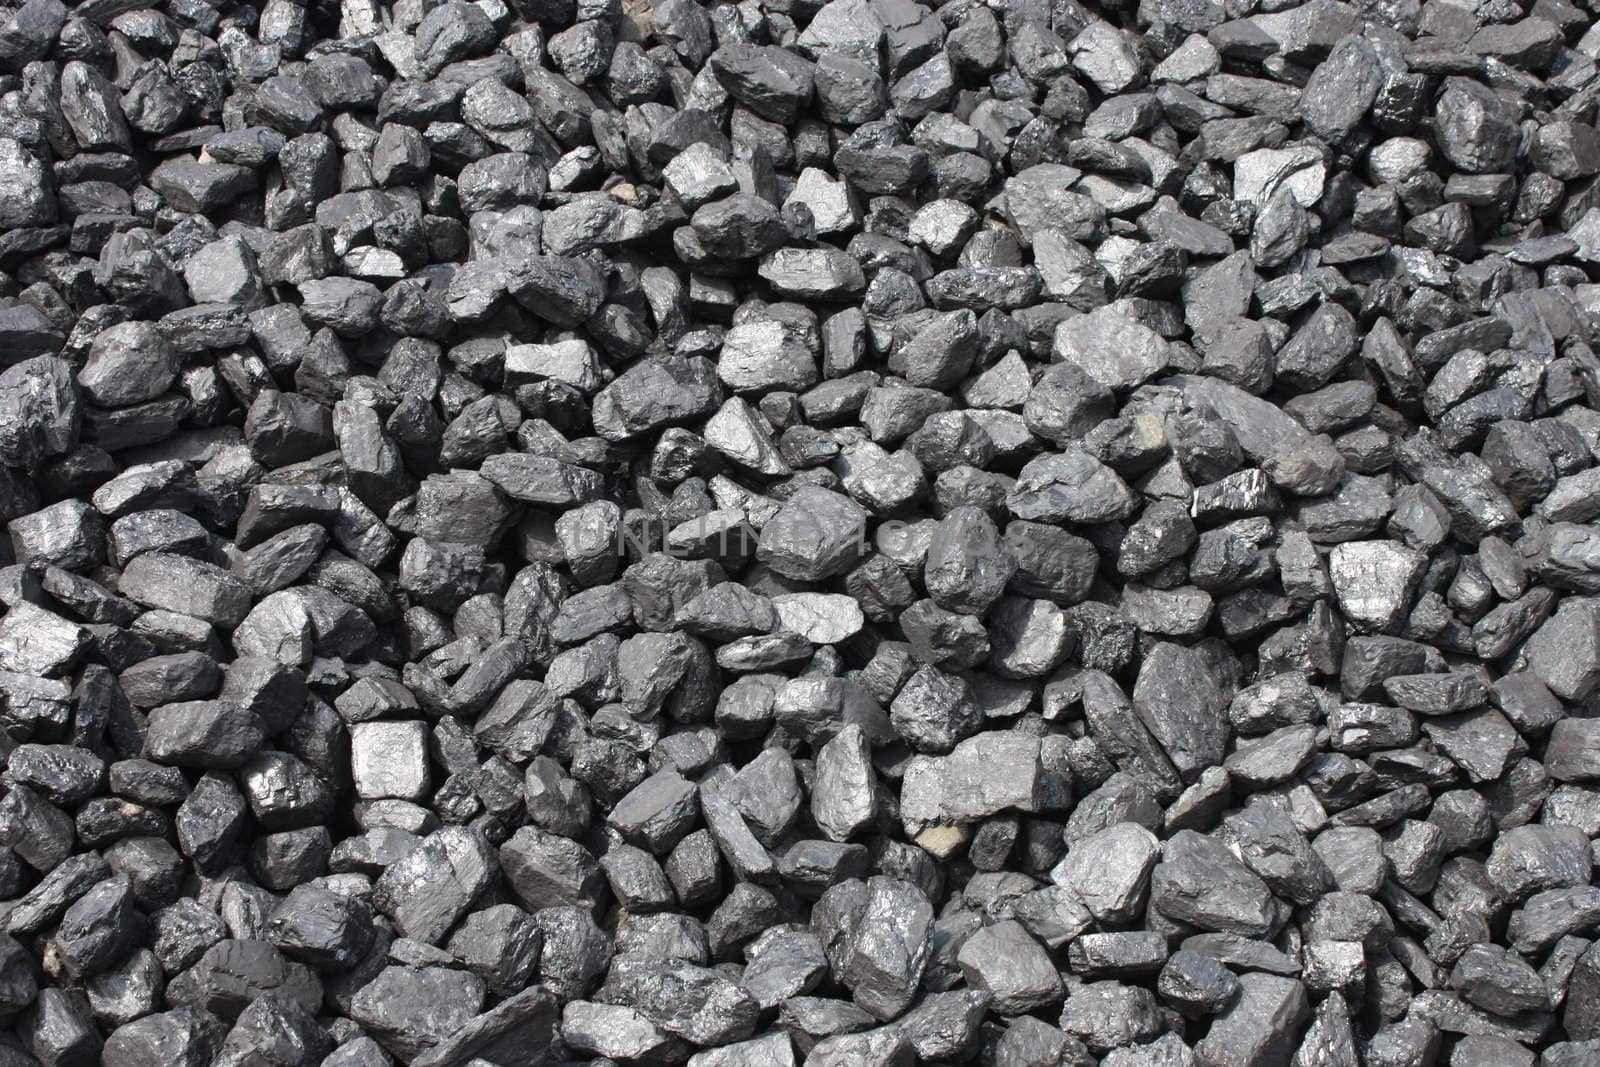 A Pile of Large Lumps of Black Coal.